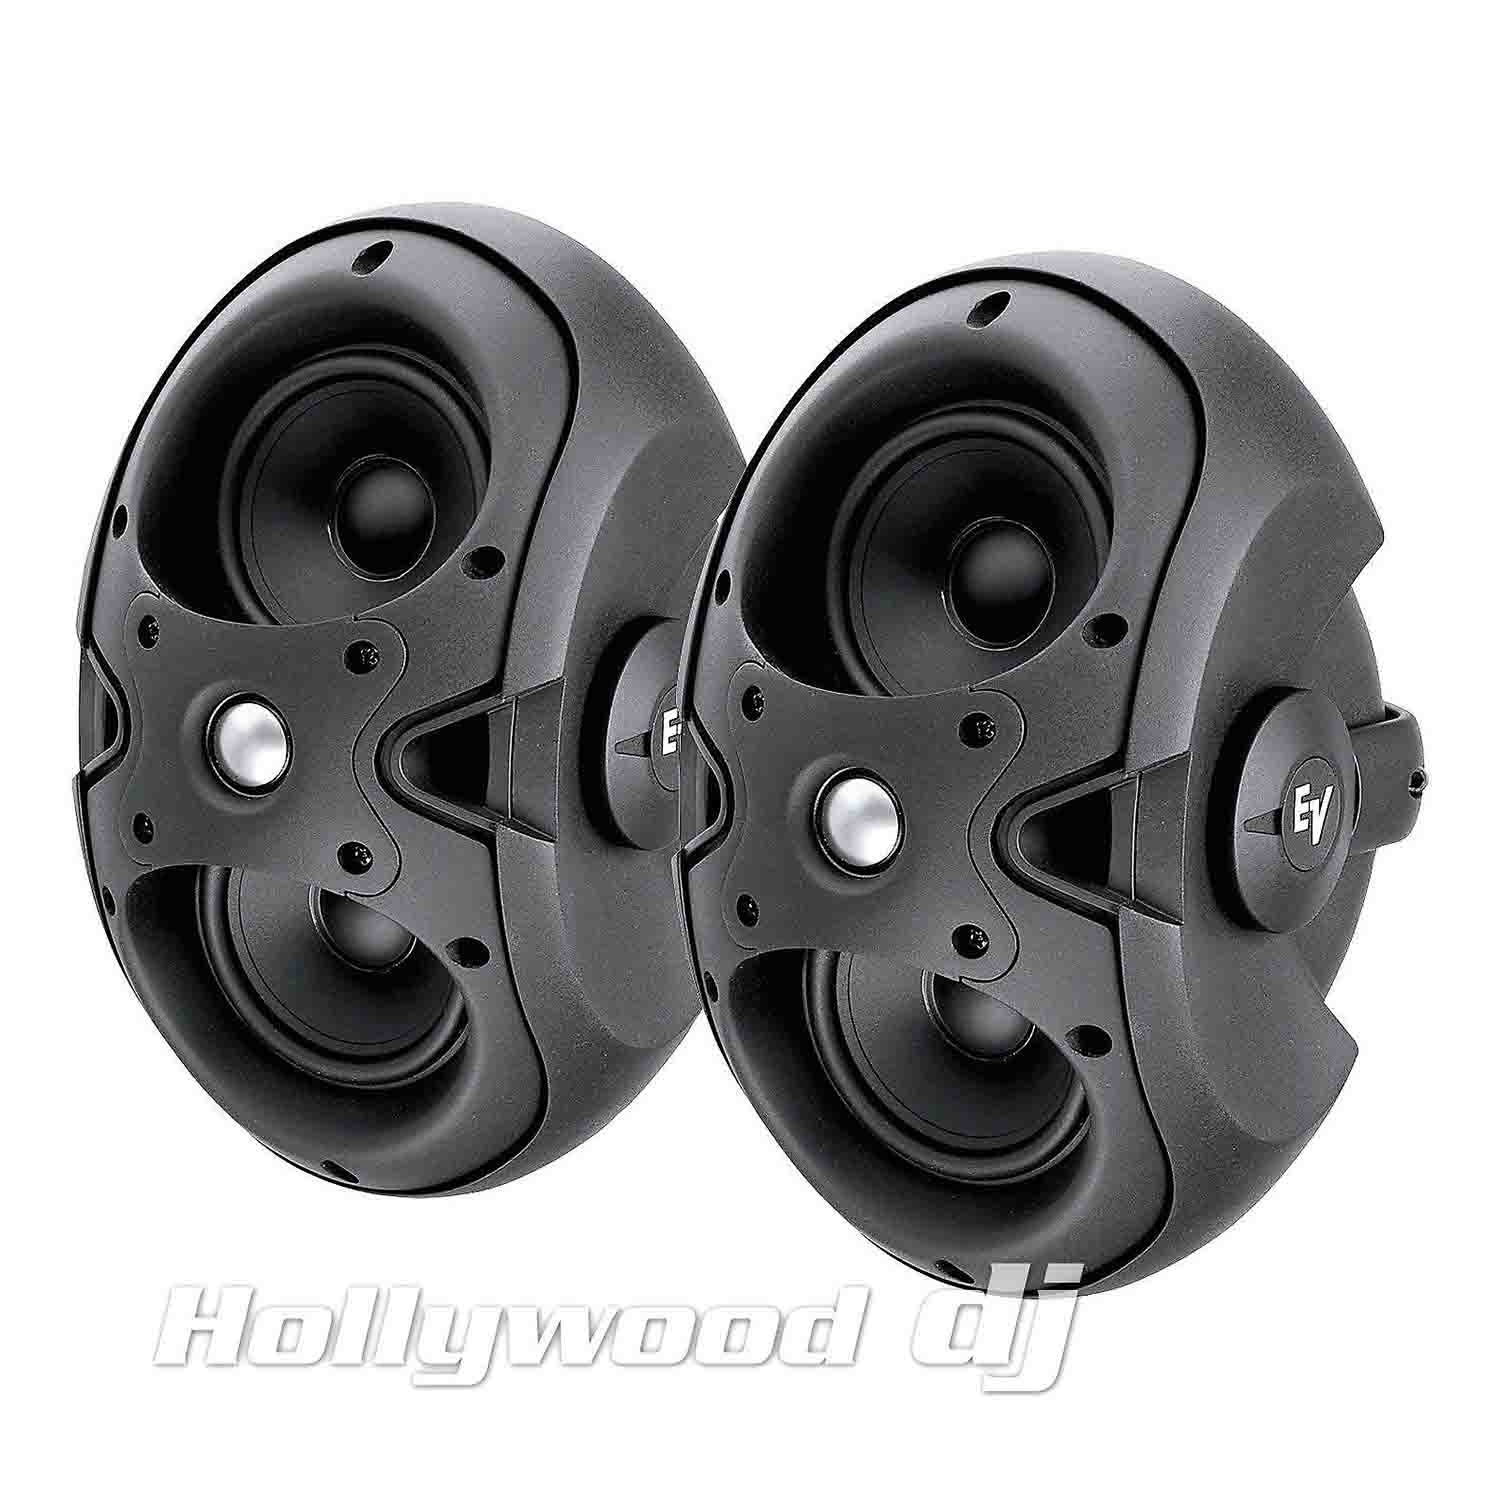 B-Stock: Electro-Voice EVID 3.2, Passive 2-Way 150W Installation Speaker with Dual 3.5" Woofers - Pair - Hollywood DJ